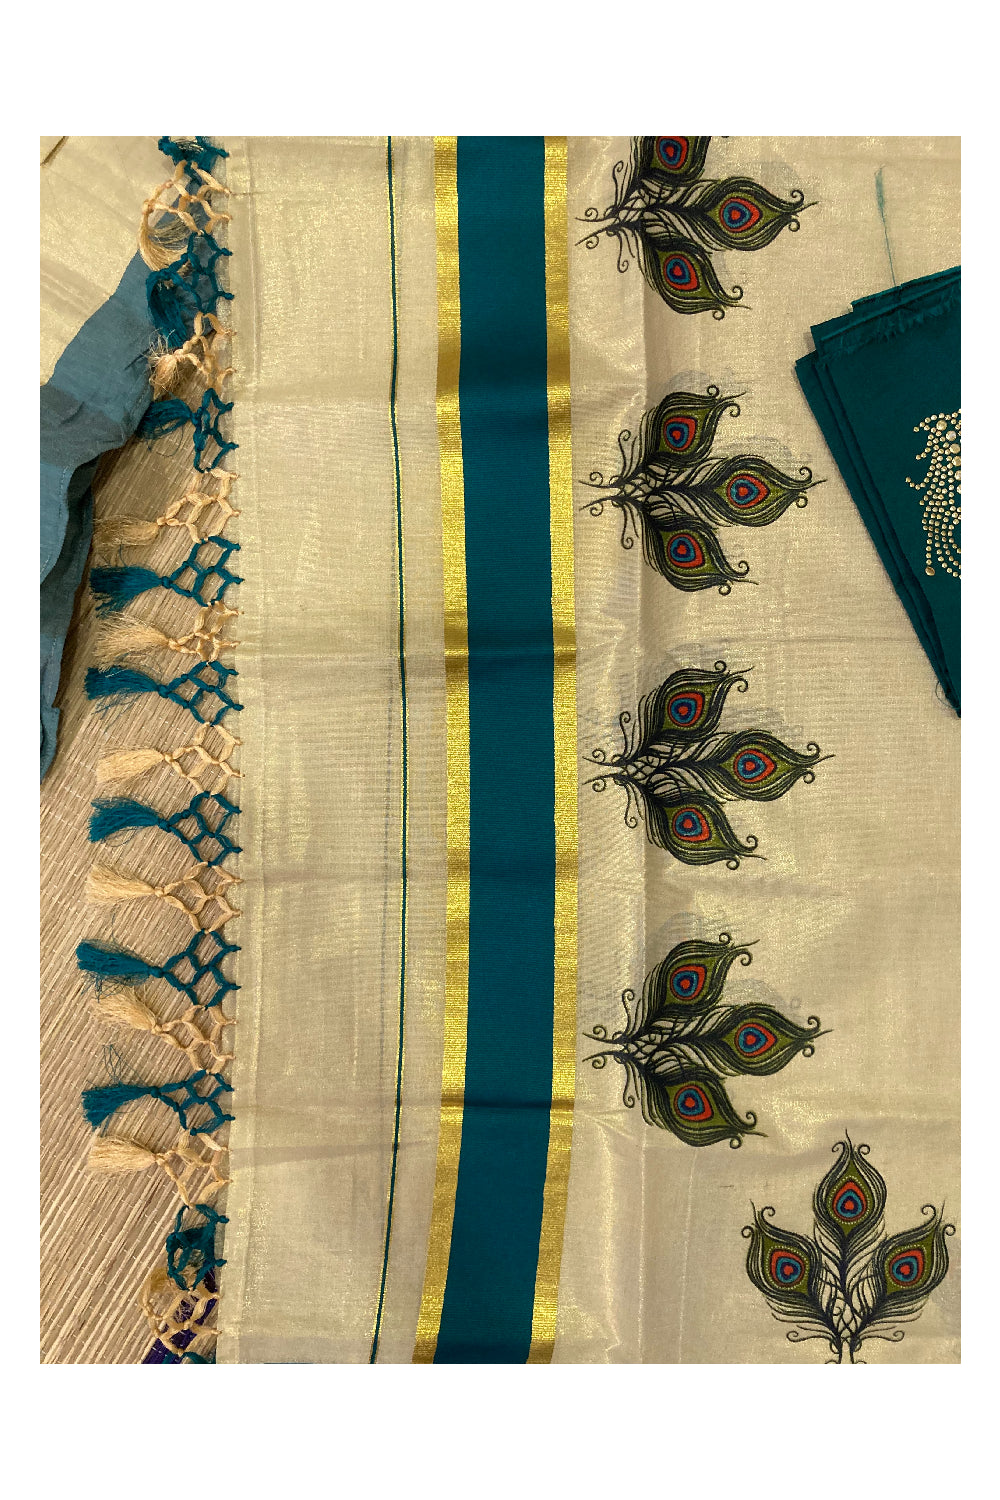 Kerala Tissue Stitched Dhavani Set with Blouse Piece and Neriyathu in with Dark Green Mural Work